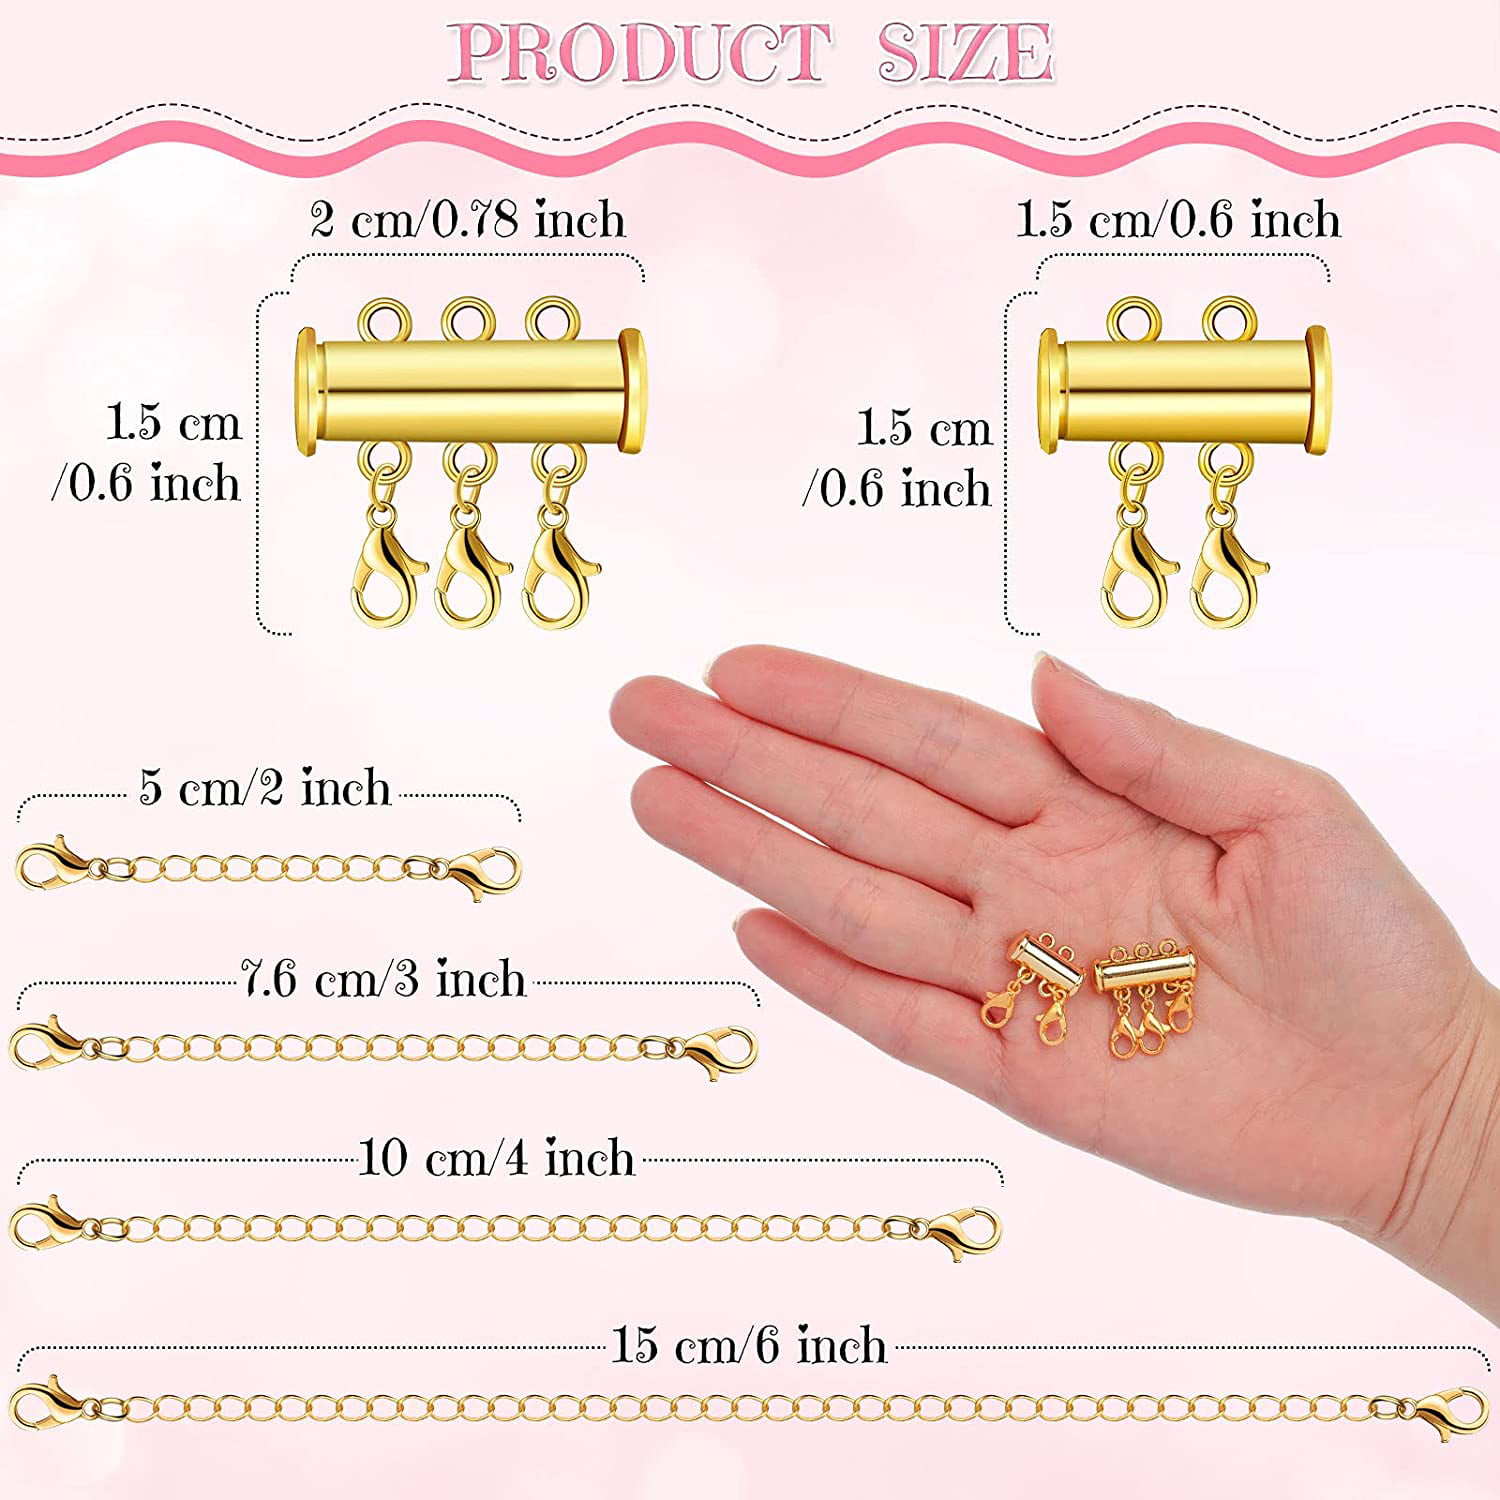 YMCAFZ Layered Necklace Spacer Clasp, 3 Strands Necklaces Slide Magnetic  Tube Lock with Lobster Clasps, Jewelry Clasps Connectors for Layered  Bracelet